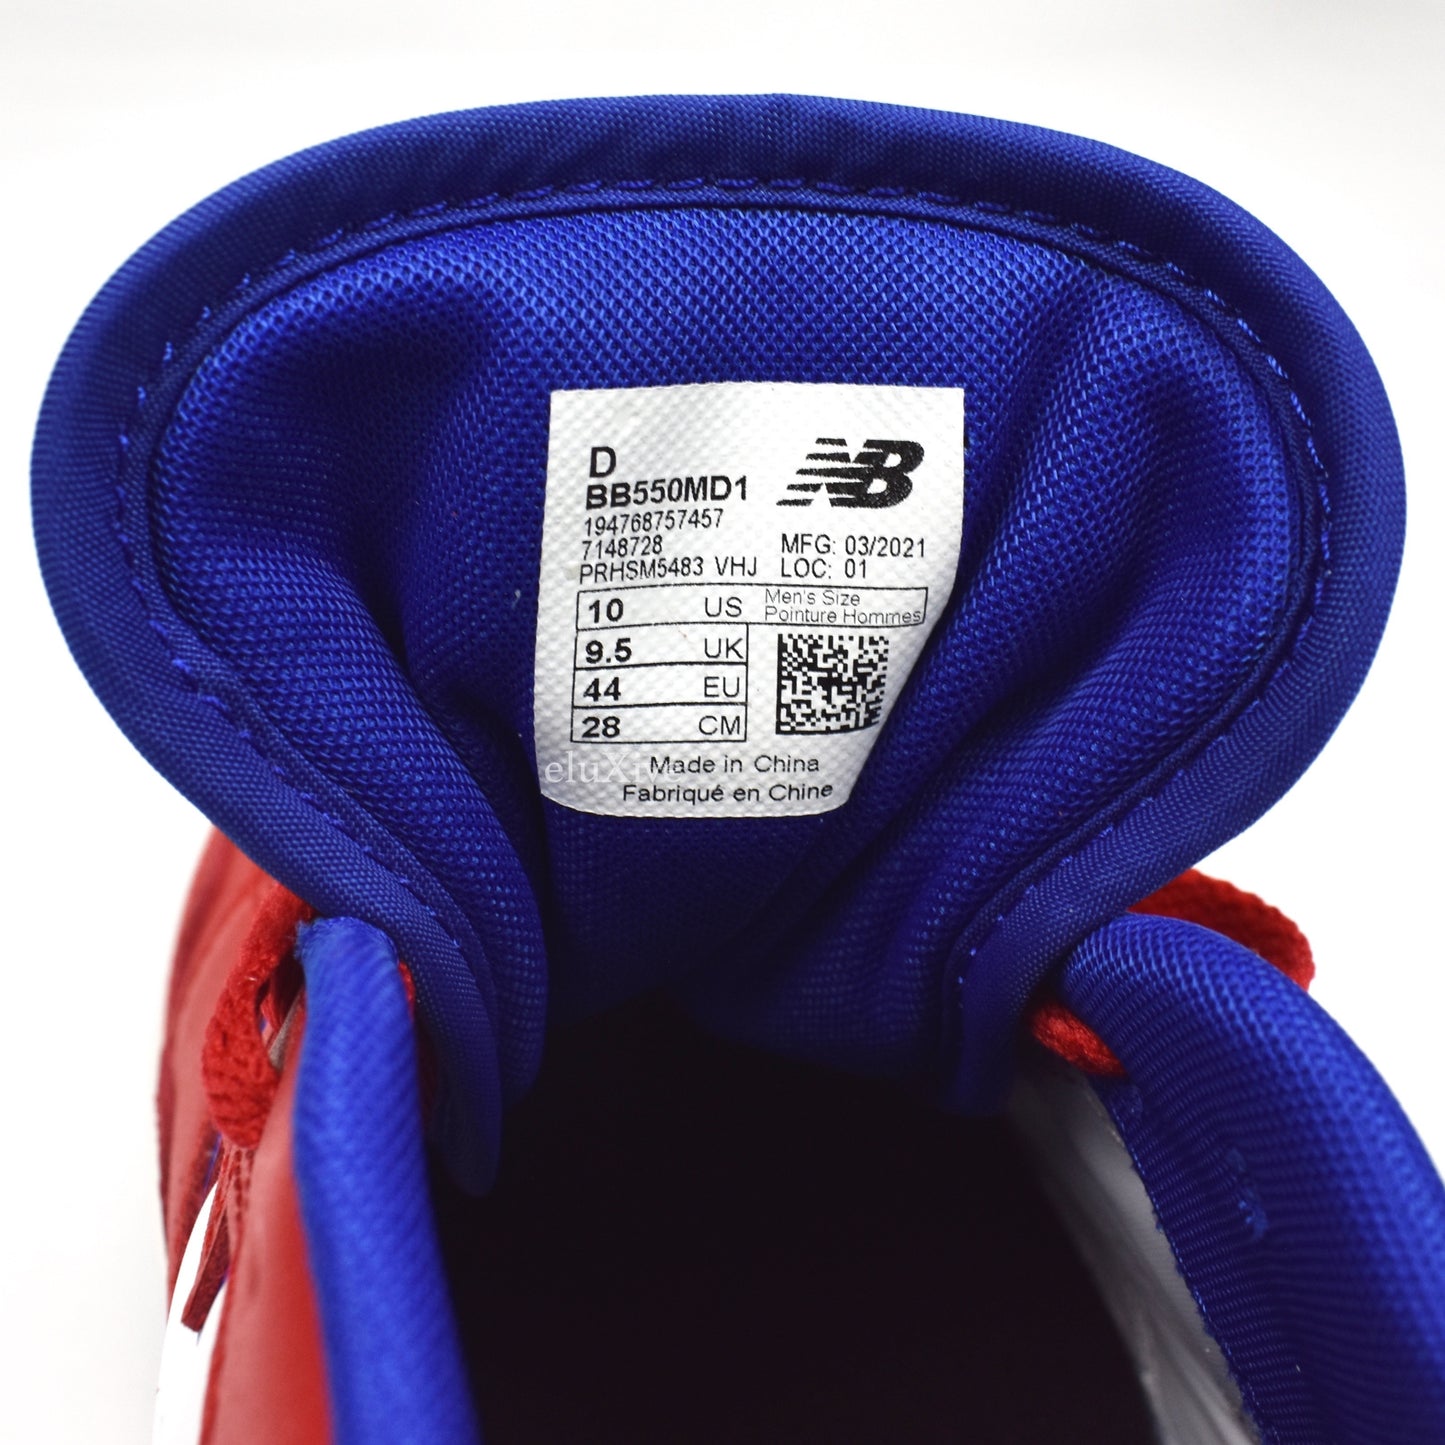 New Balance - 550 Basketball Sneakers (Red/Blue)